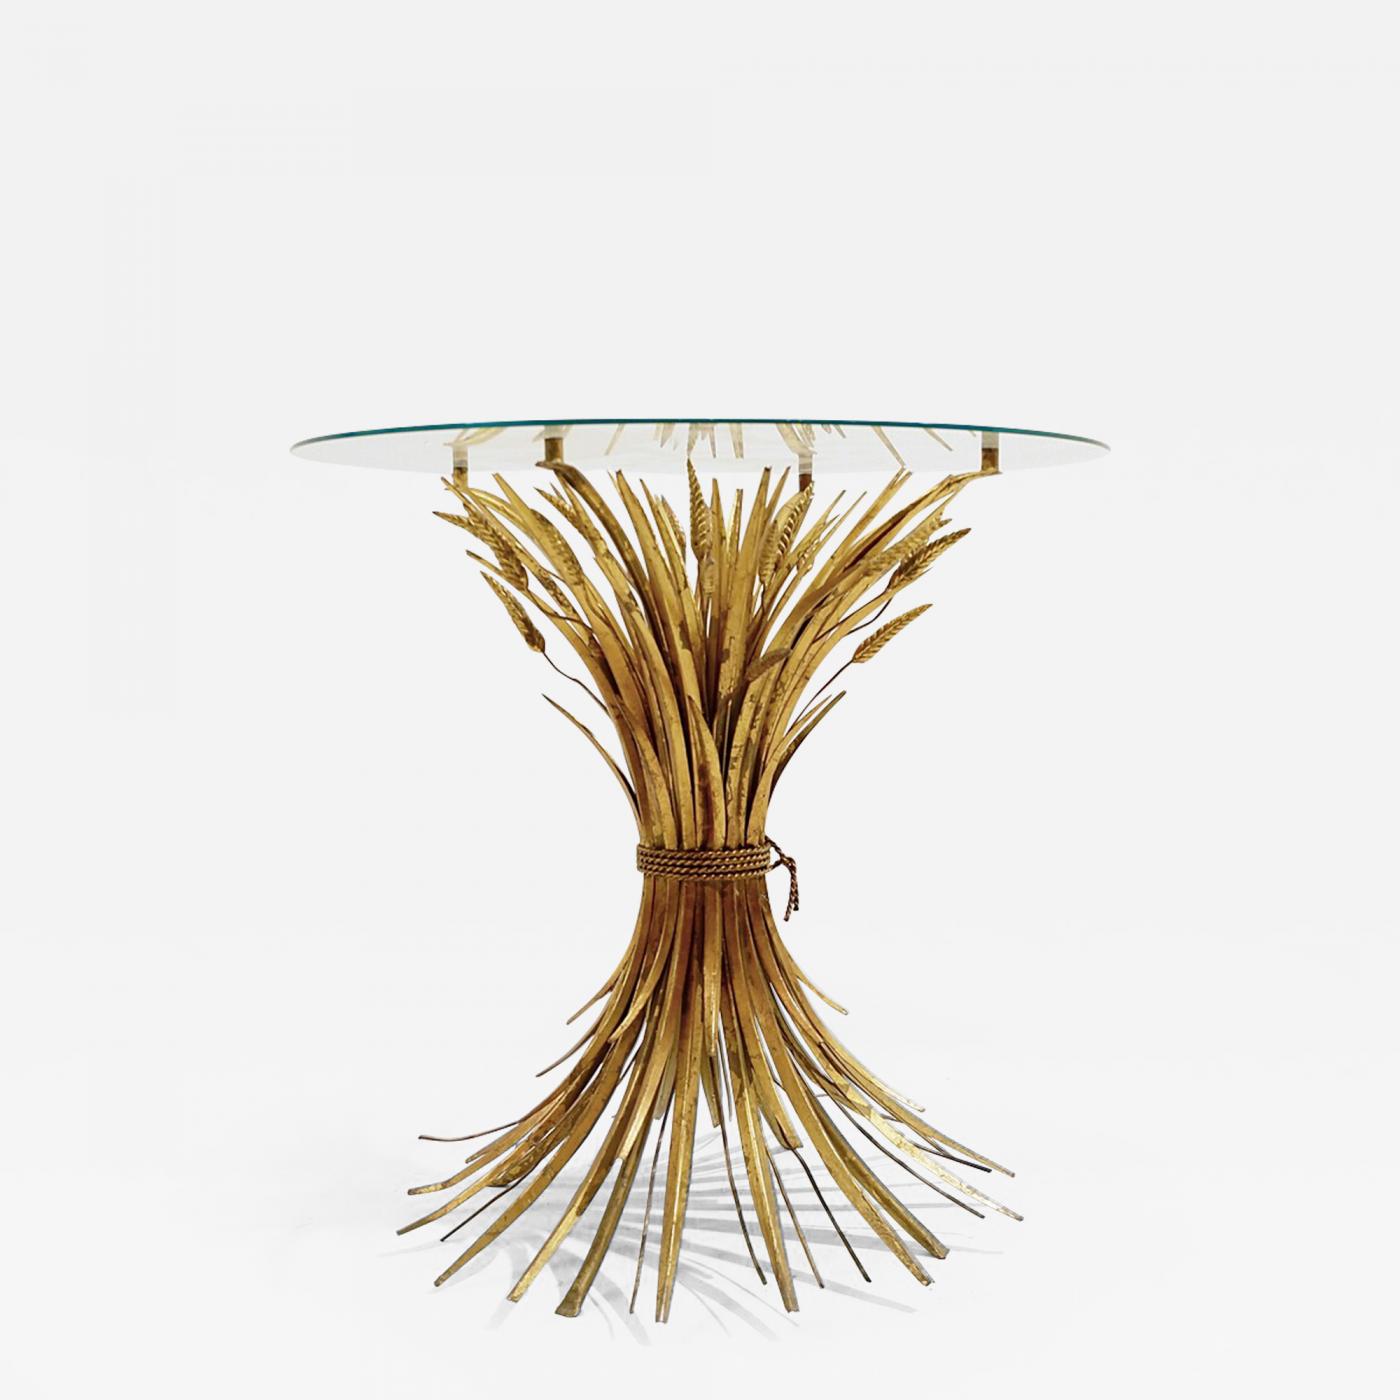 Coco Chanel Style Sheaf of Wheat Gilt Metal Coffee Table Look for Less